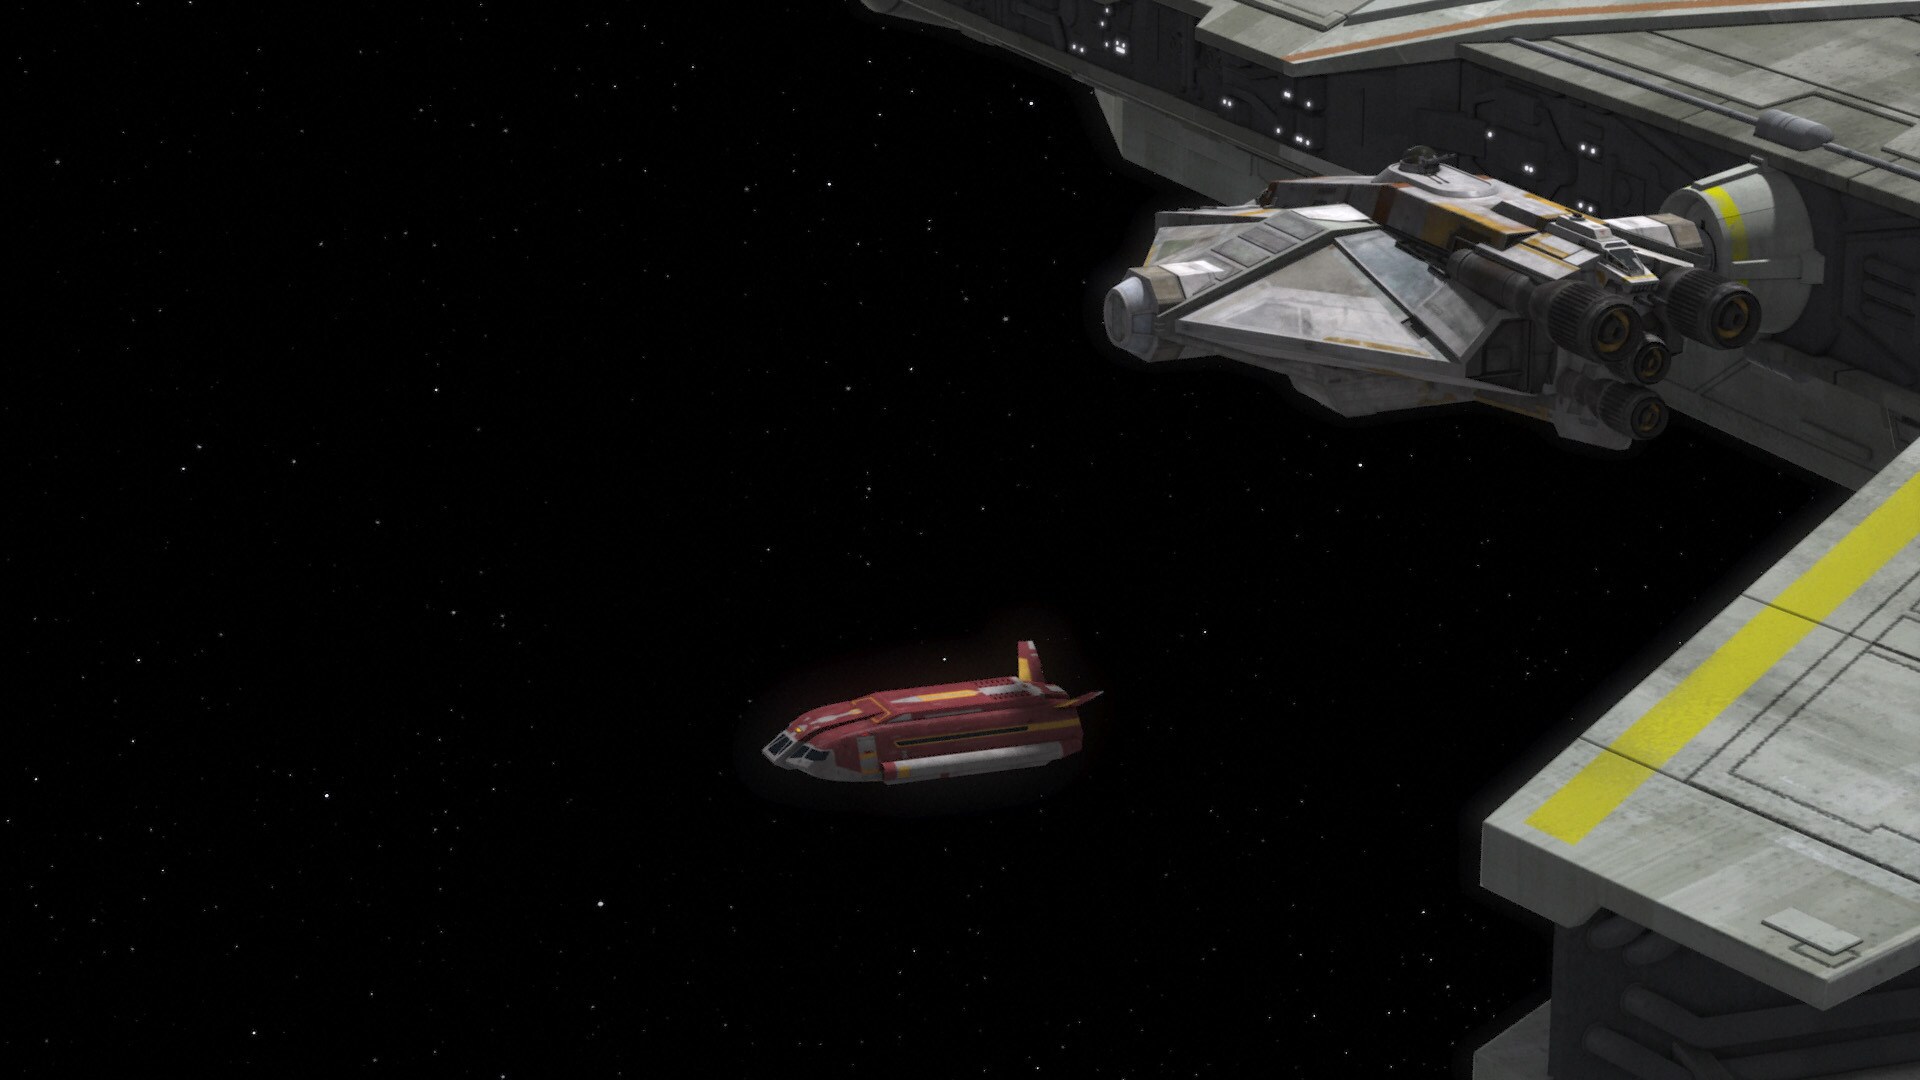 To avoid detection, the Ghost team takes a shuttle back to Lothal where they'll rendezvous with M...